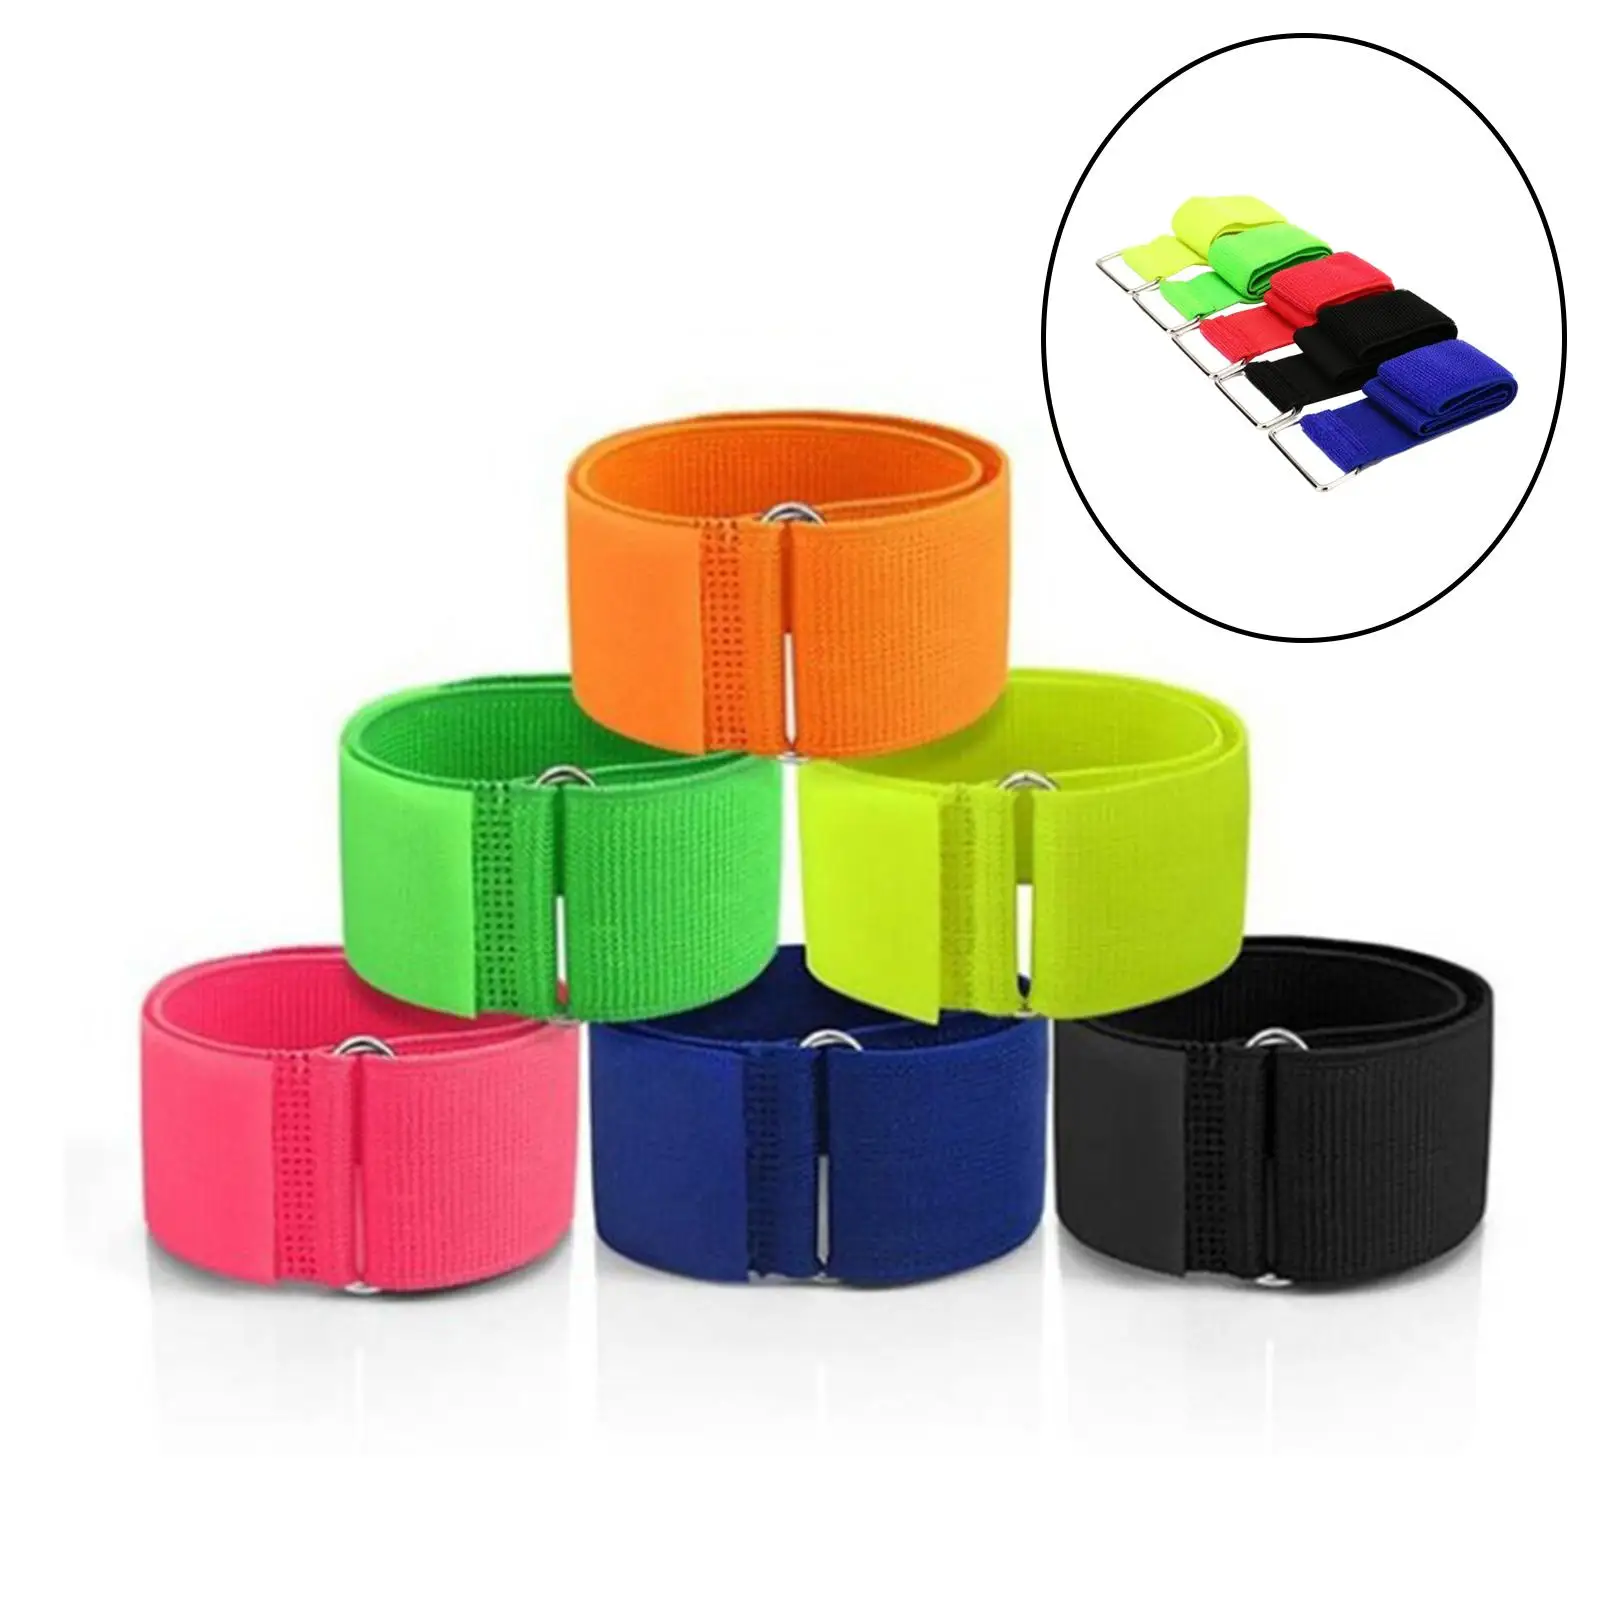 5 Pieces Firm Relay Race Game Bands Birthday Party Games Christmas Game Carnival Relay Race Game Race Bands for Adult Family